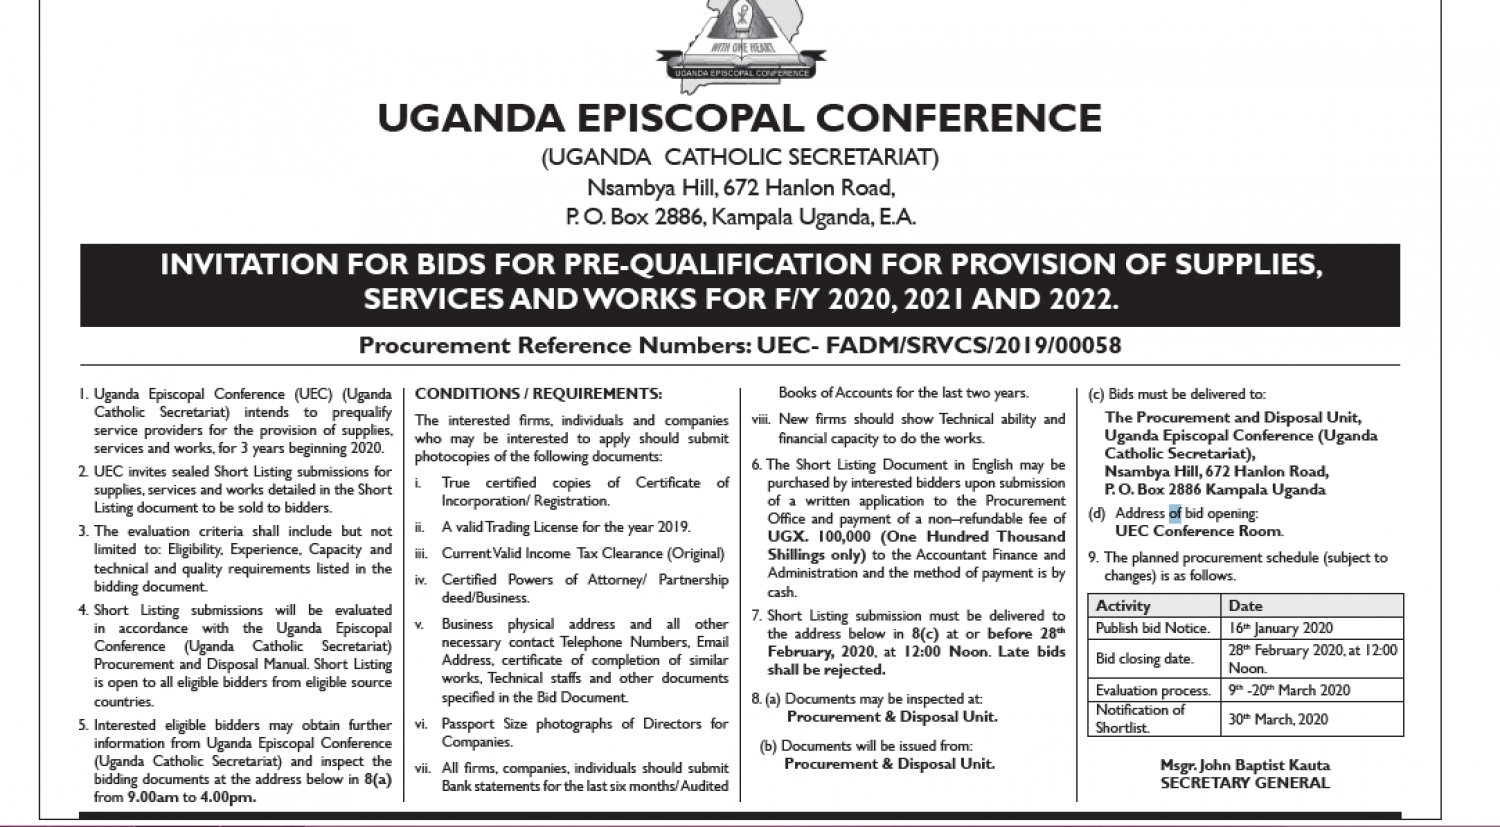 INVITATION FOR BIDS FOR PRE-QUALIFICATION FOR PROVISION OF SUPPLIES, SERVICES AND WORKS FOR F/Y 2020, 2021 AND 2022.